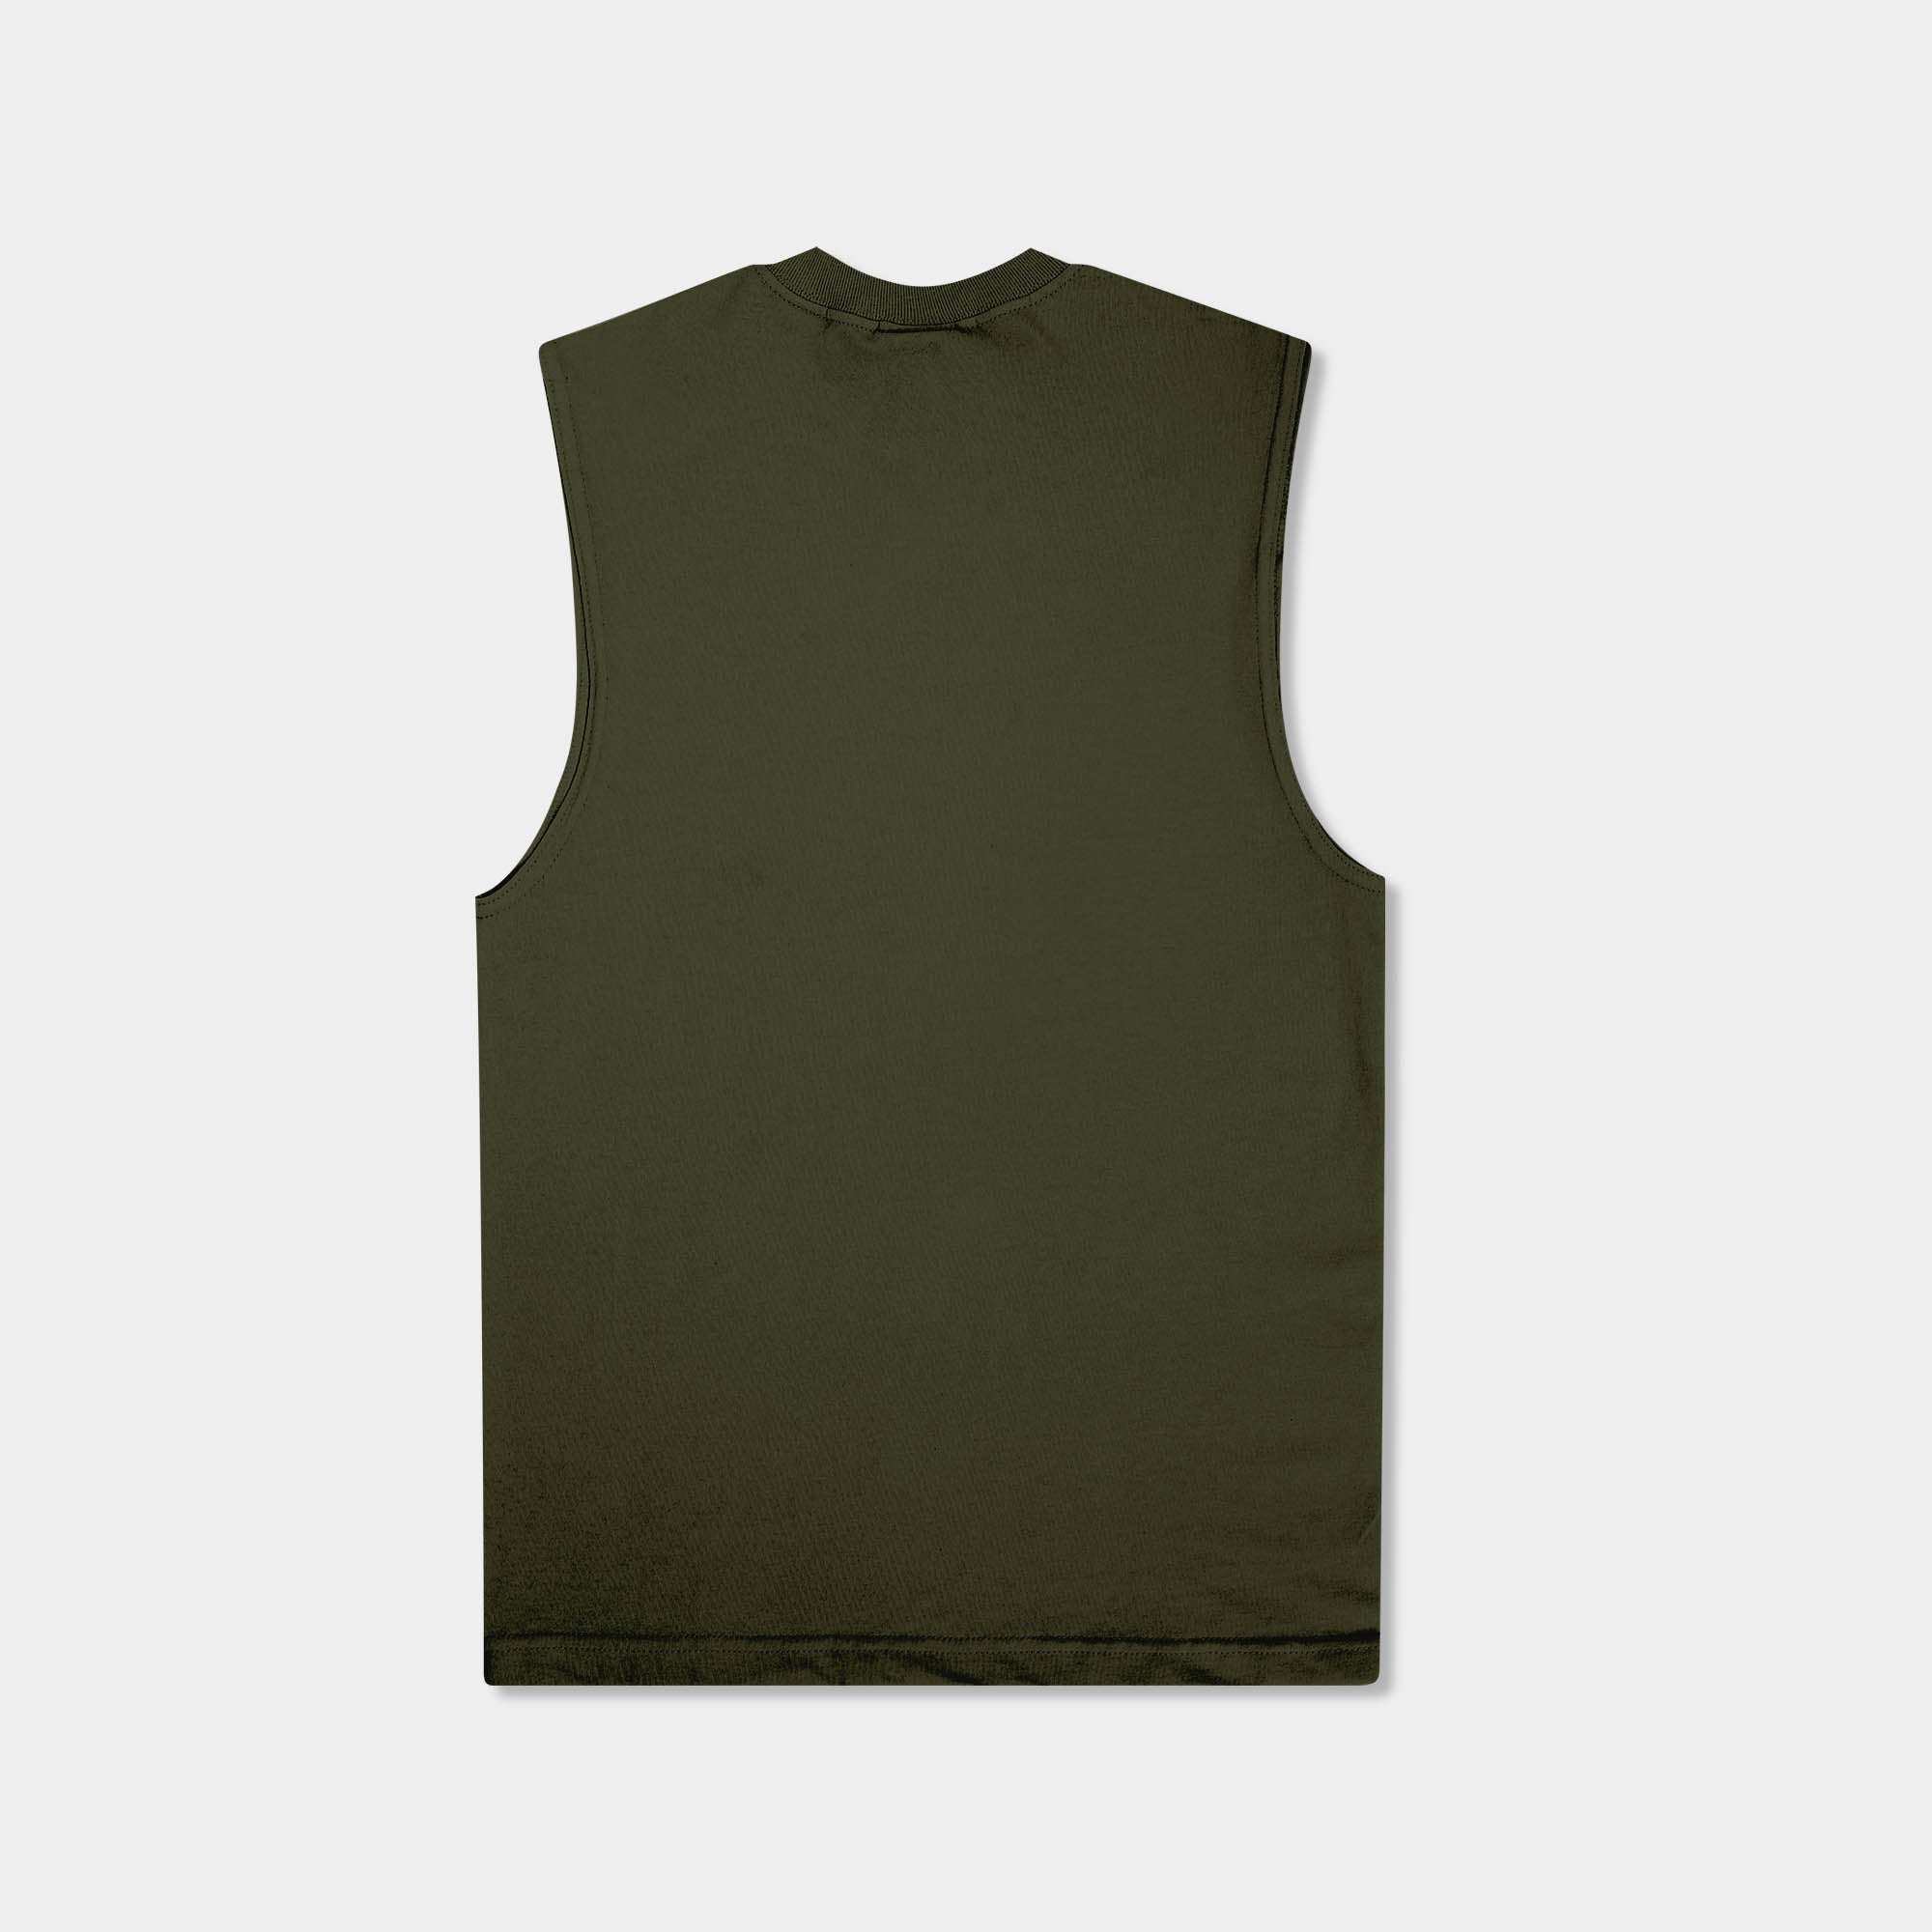 muscle tank_muscle tee_muscle tank tops_cropped muscle tank_under armour muscle shirt_insta slim tank_men muscle shirt_tank top_Olive